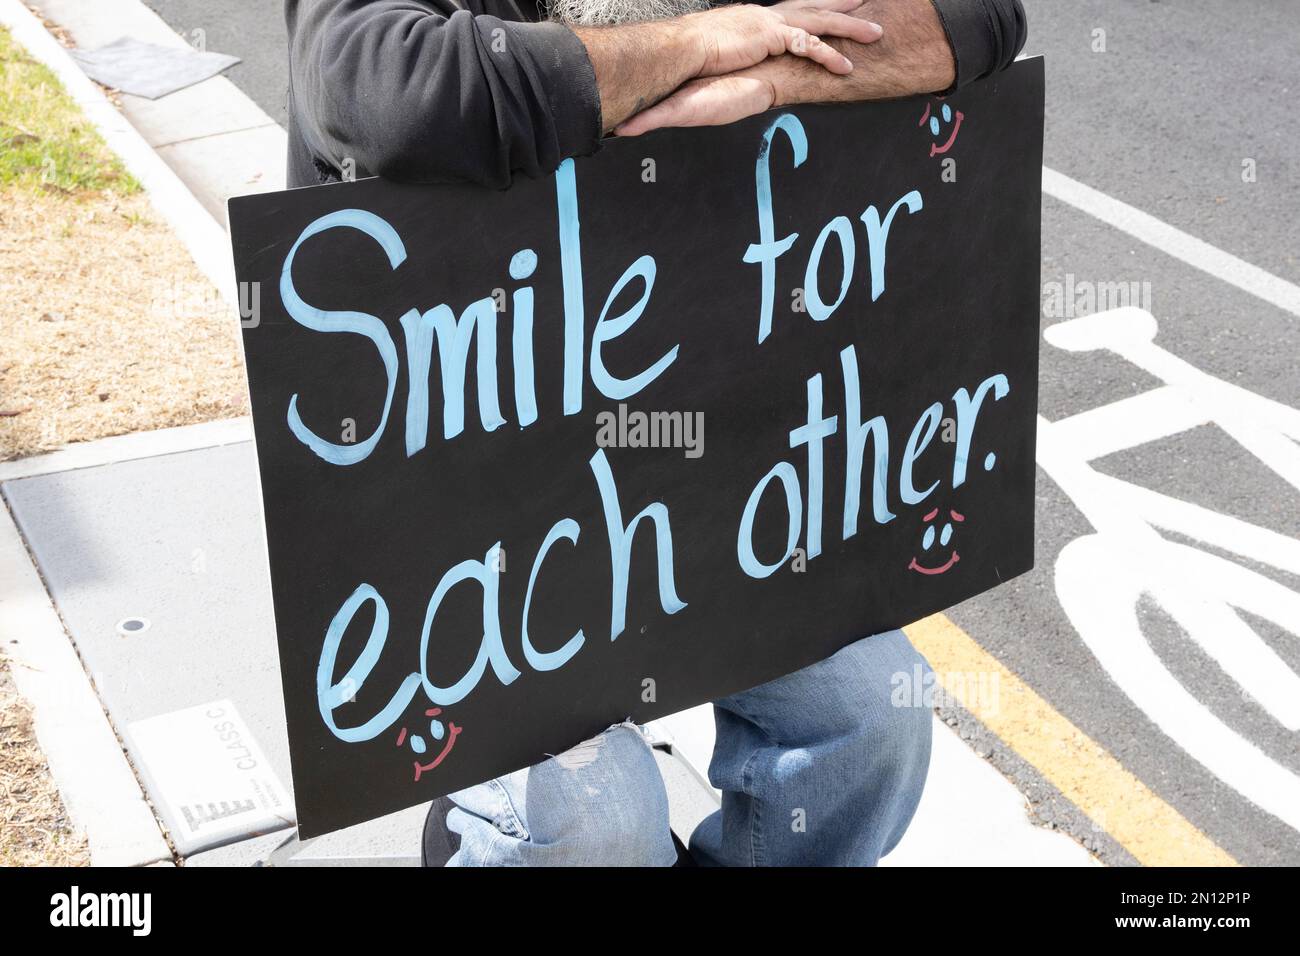 smile for each other hand written sign on chalk board Stock Photo